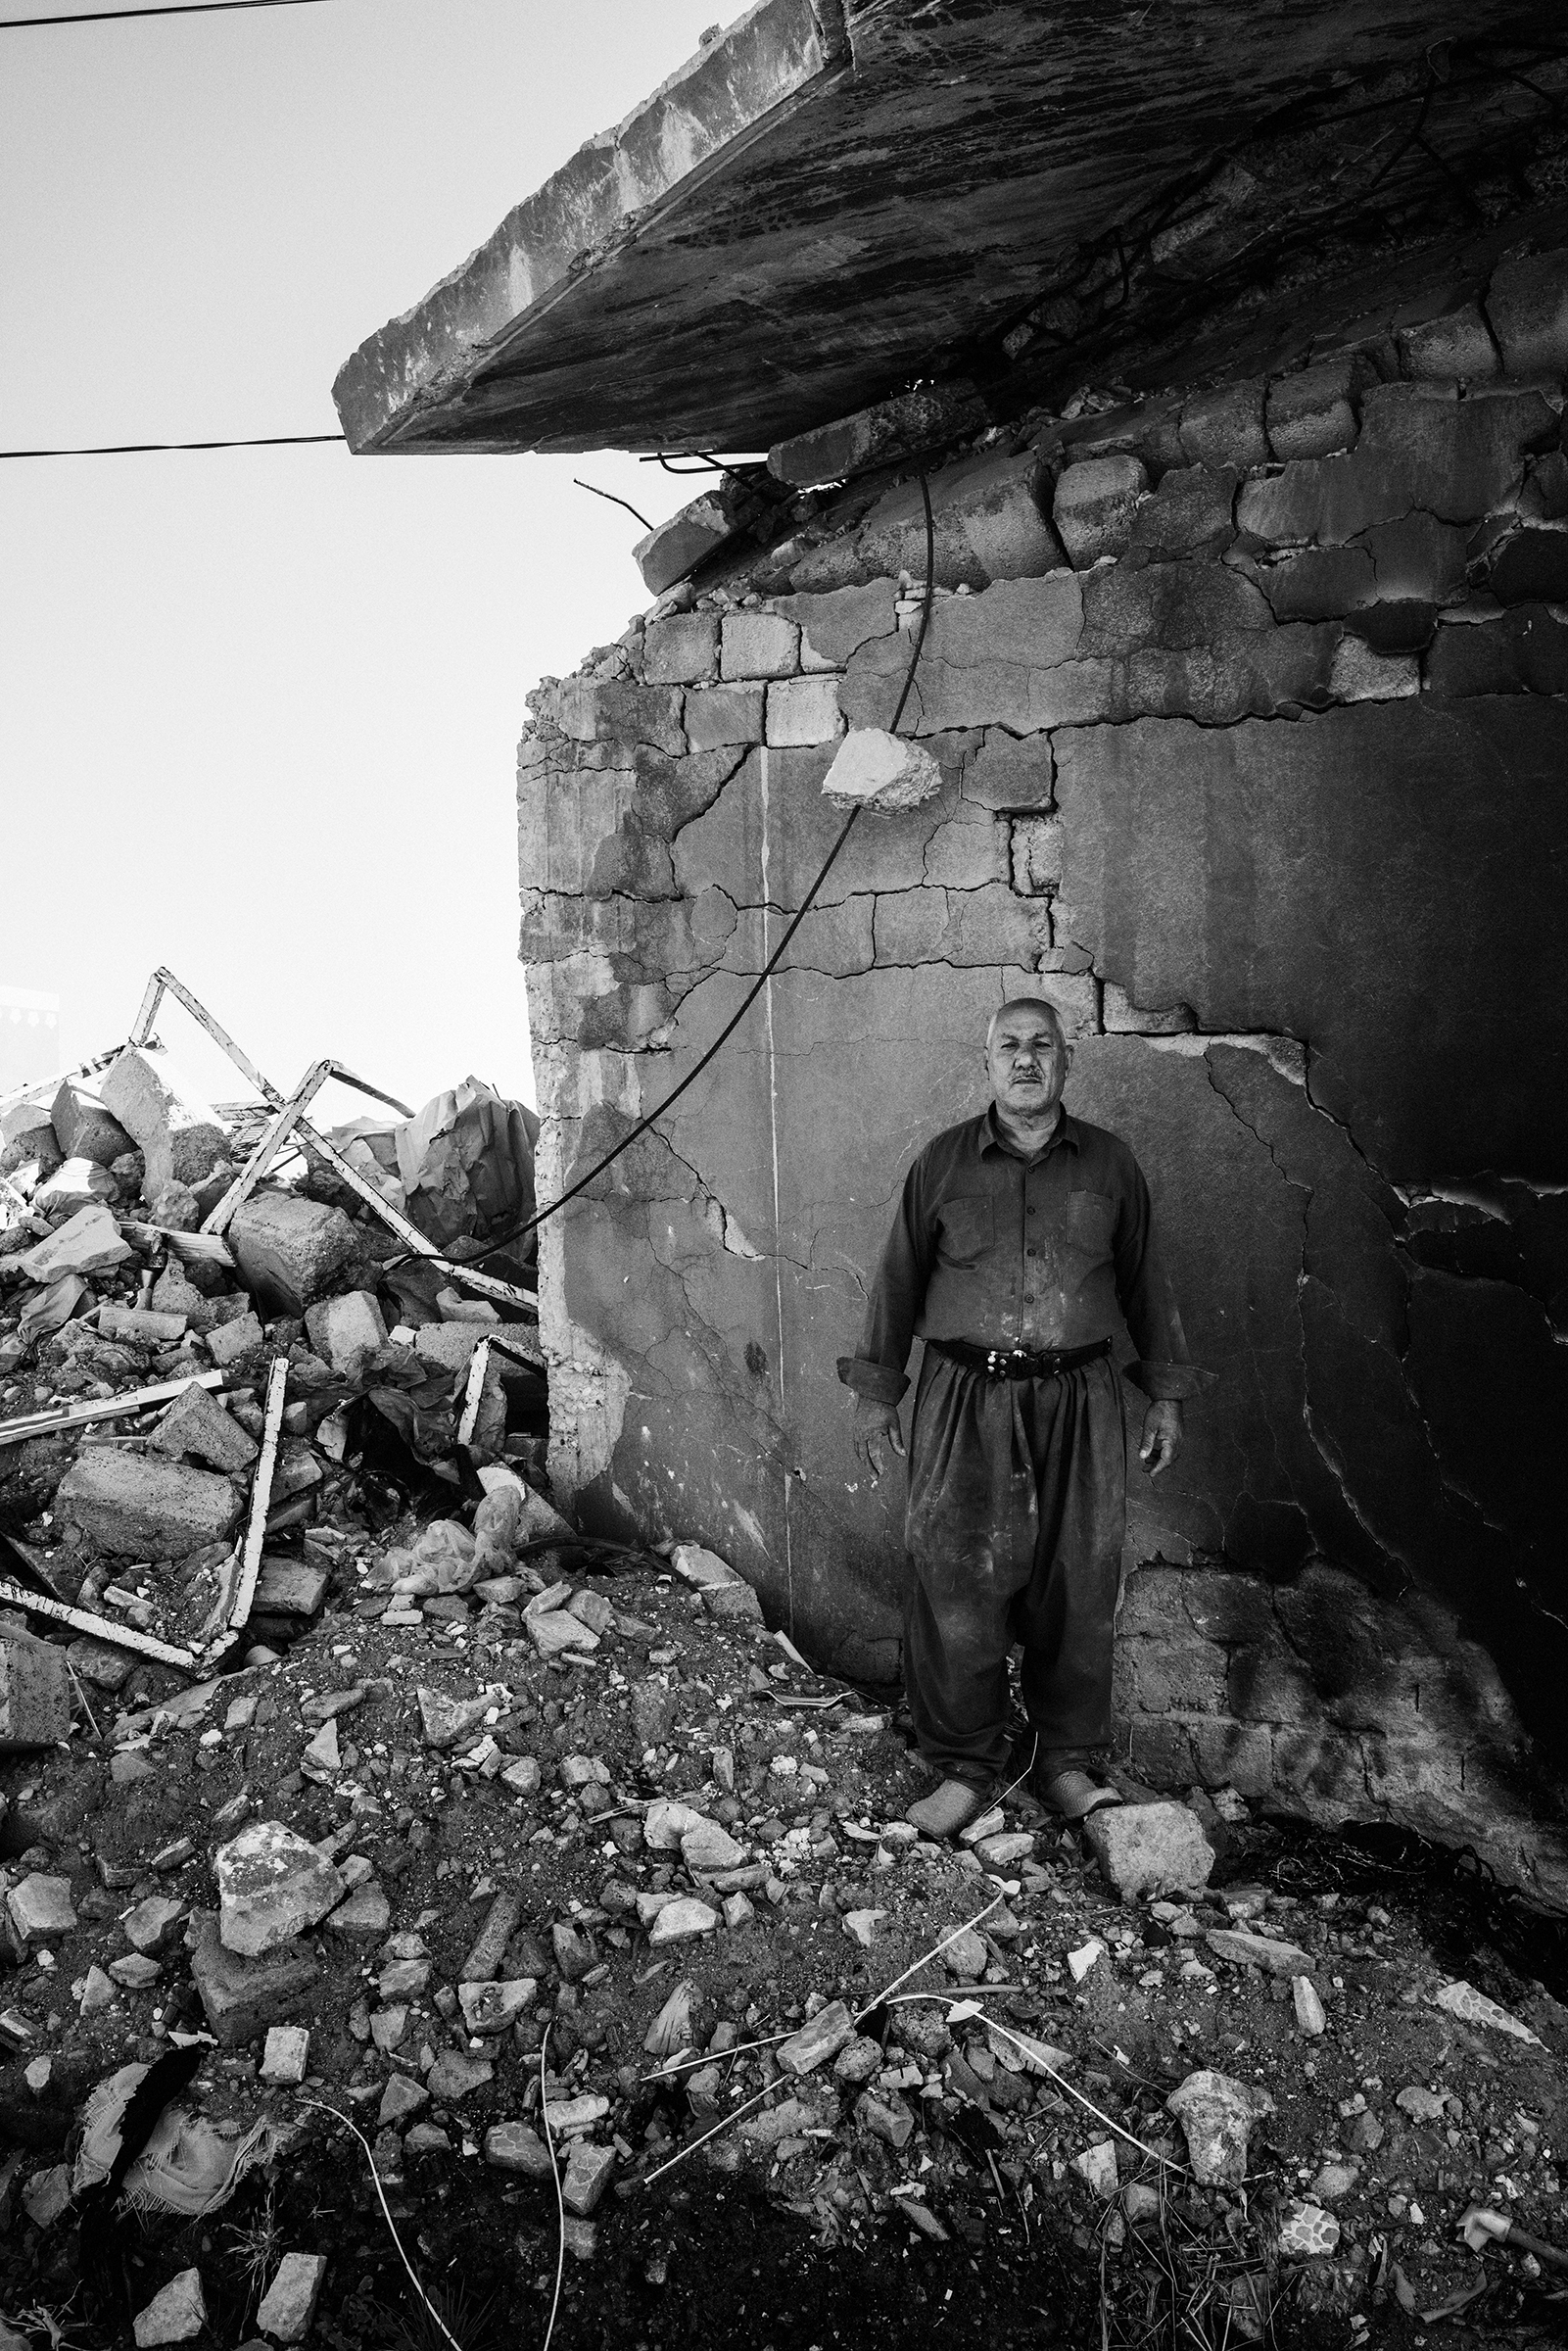 Mohsin Hairan Aswad, 60, a wealthy Yazidi Kurd from Bashiqa, stands in the remains of one of the seven homes that he owns. His homes were destroyed during the fighting to liberate the town from ISIS control in 2016. The next year, his son Faris, a local policeman in Mosul, was killed by an ISIS sniper. (Moises Saman—Magnum Photos for TIME)